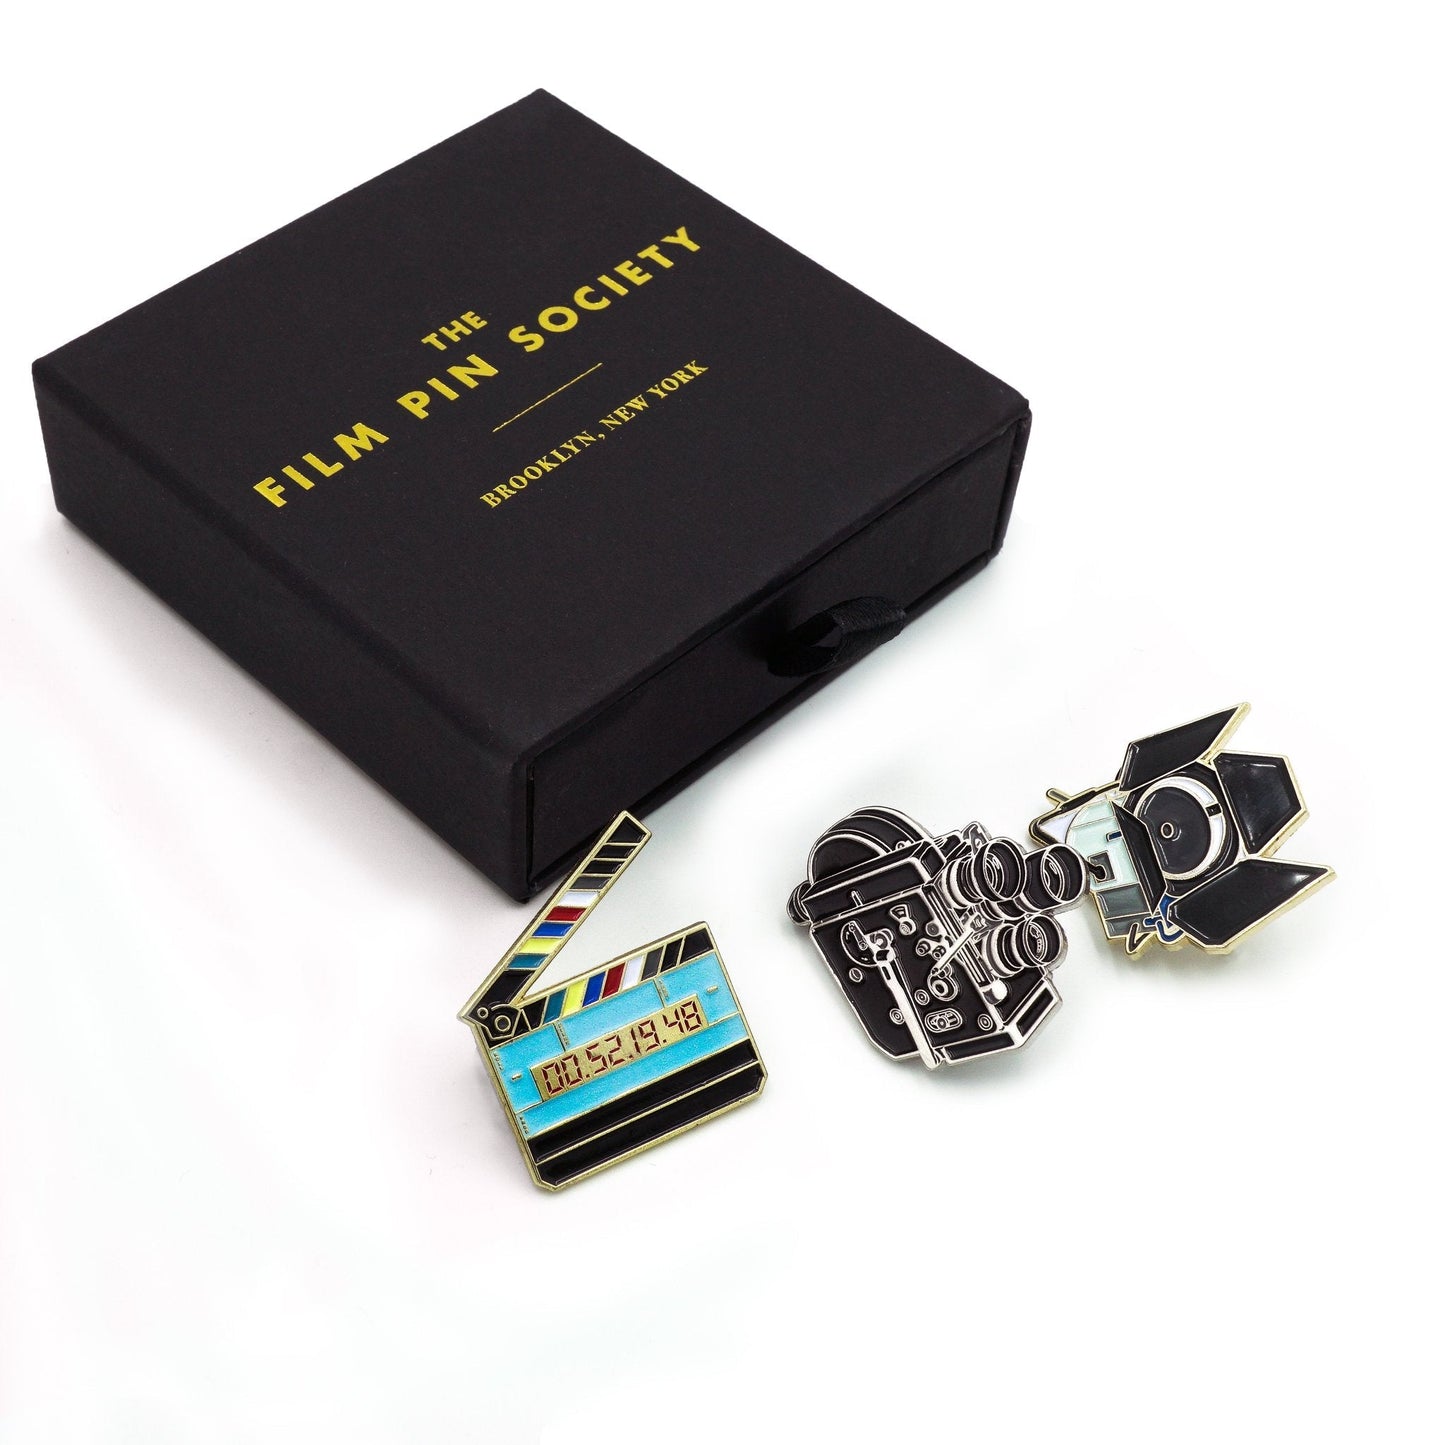 Cinematography Pins by Film Pin Society